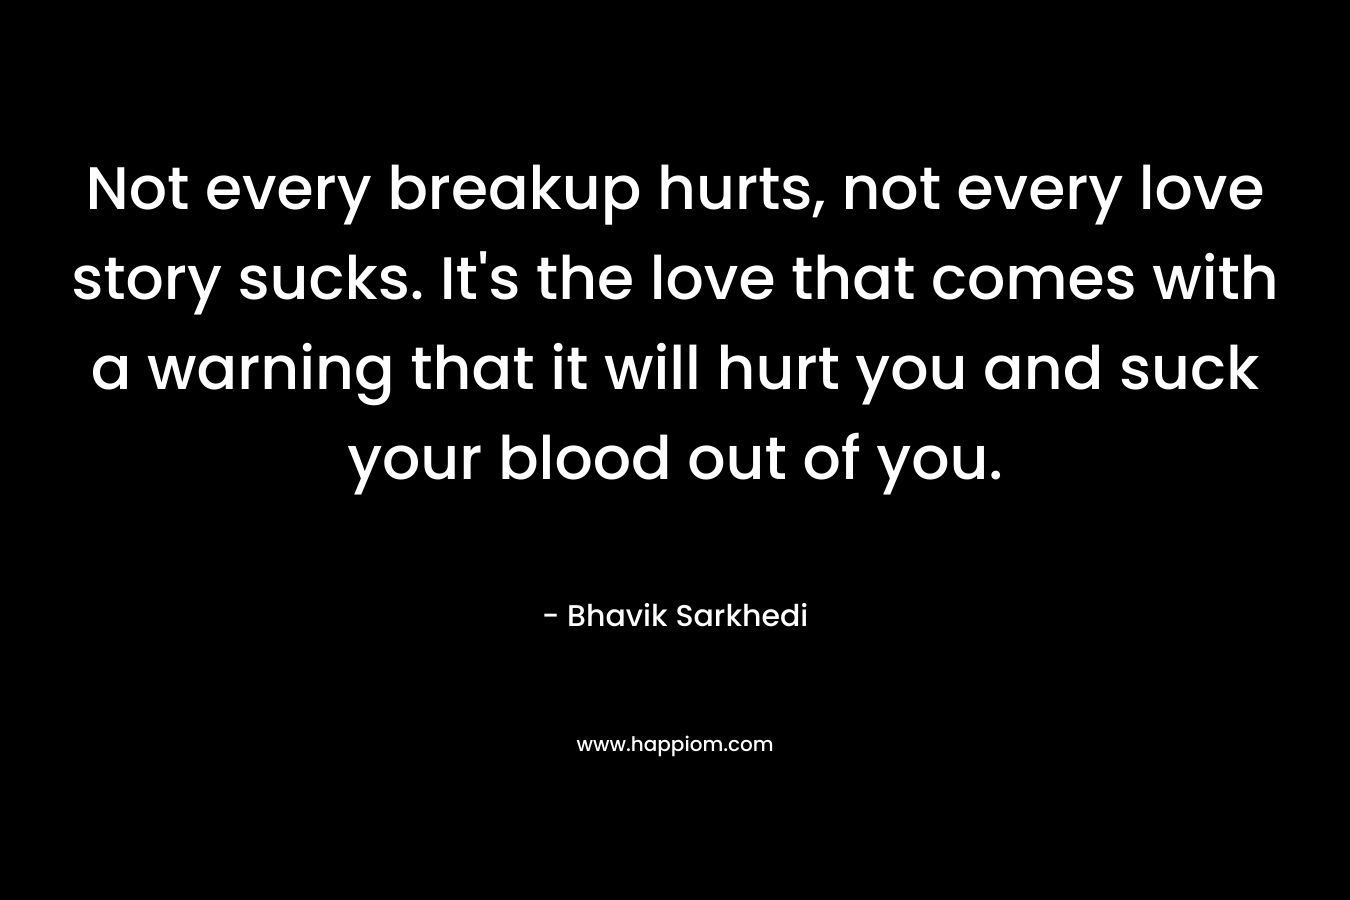 Not every breakup hurts, not every love story sucks. It’s the love that comes with a warning that it will hurt you and suck your blood out of you. – Bhavik Sarkhedi